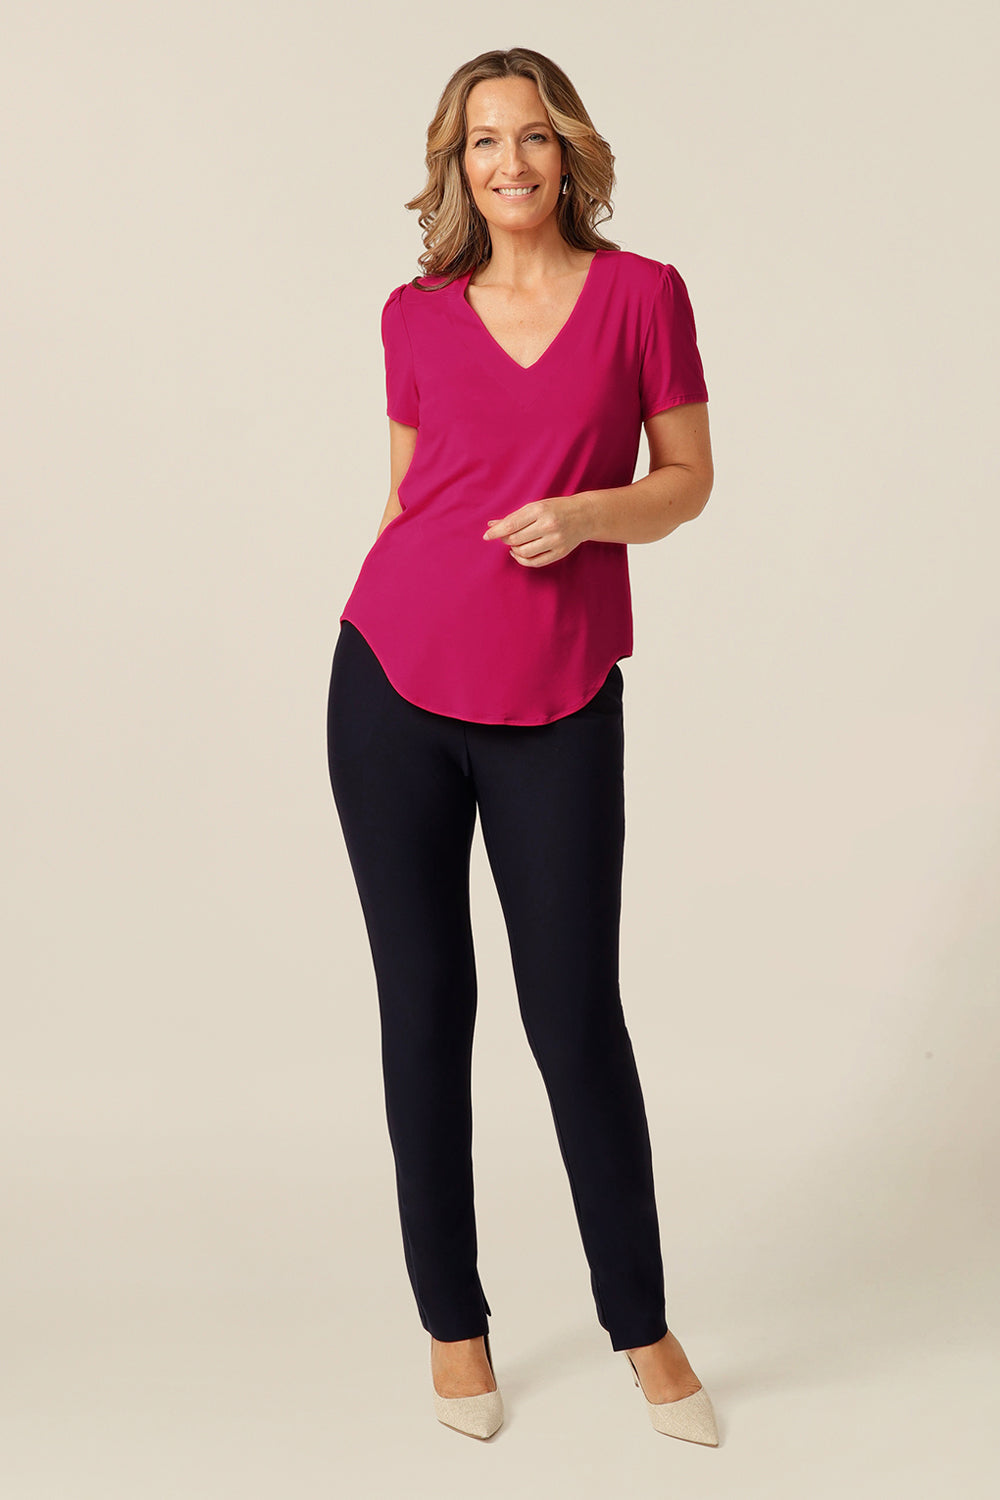 women's short sleeve top with V-neck. Made in Australia from eco-conscious, lightweight bamboo jersey, for petite to plus size women